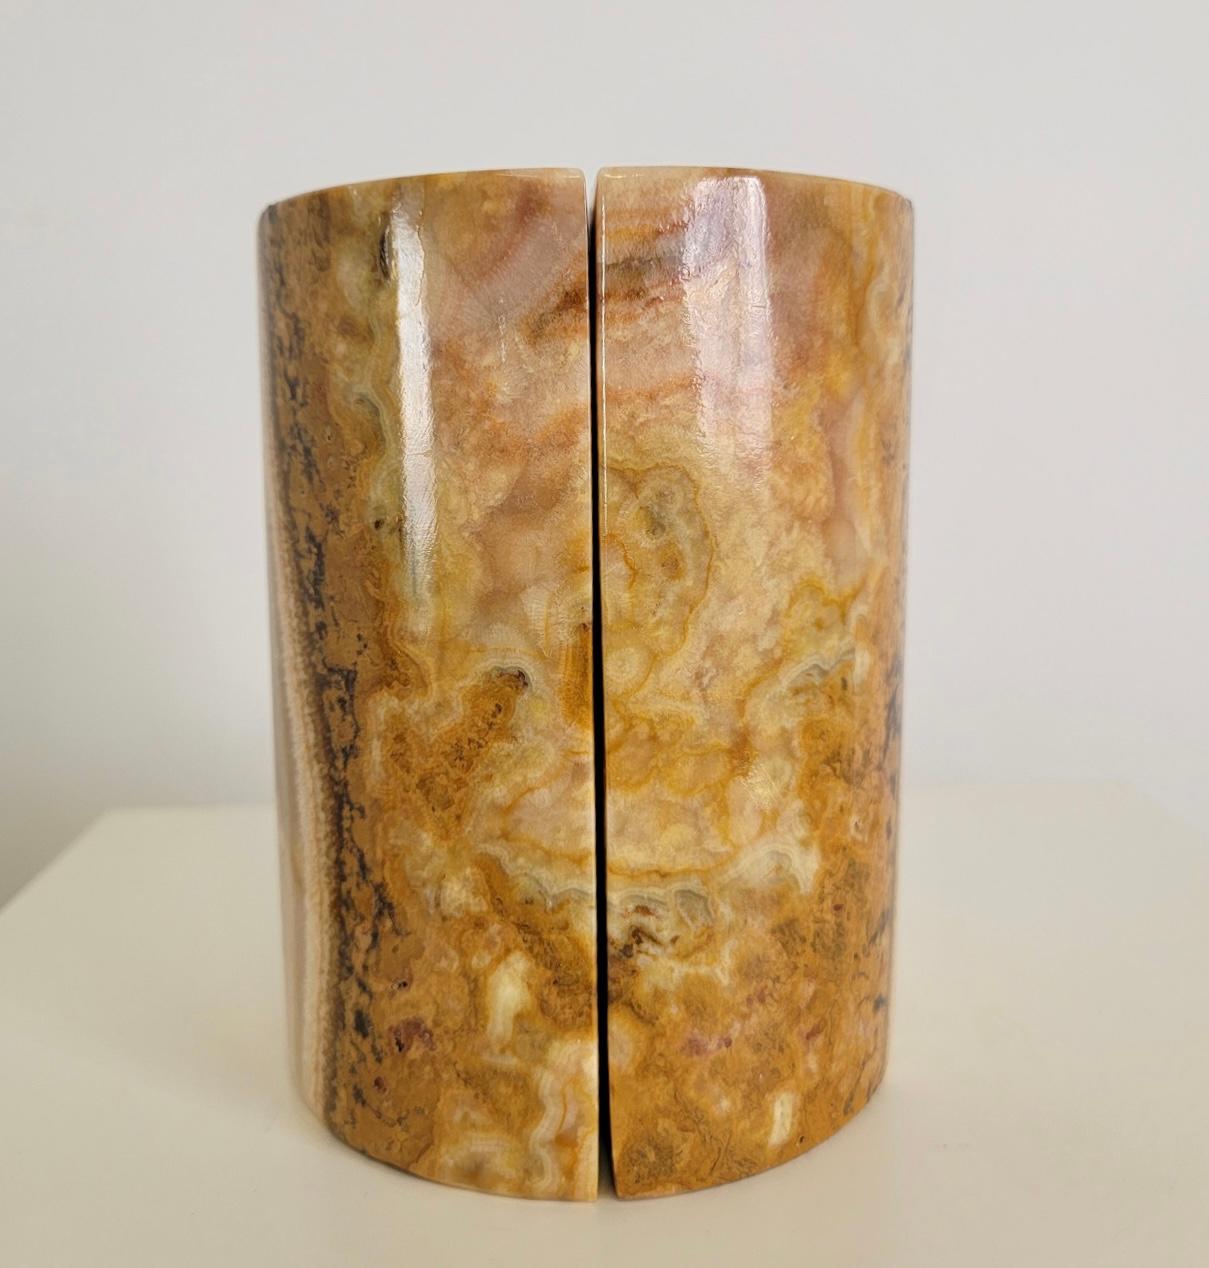 Gorgeous pair of onyx stone bookends.
The onyx which is a stone that has beautiful veining and a variety of colours throughout. These bookends come as a pair and form a round cylinder shape and each piece is a half circle. They can be used as